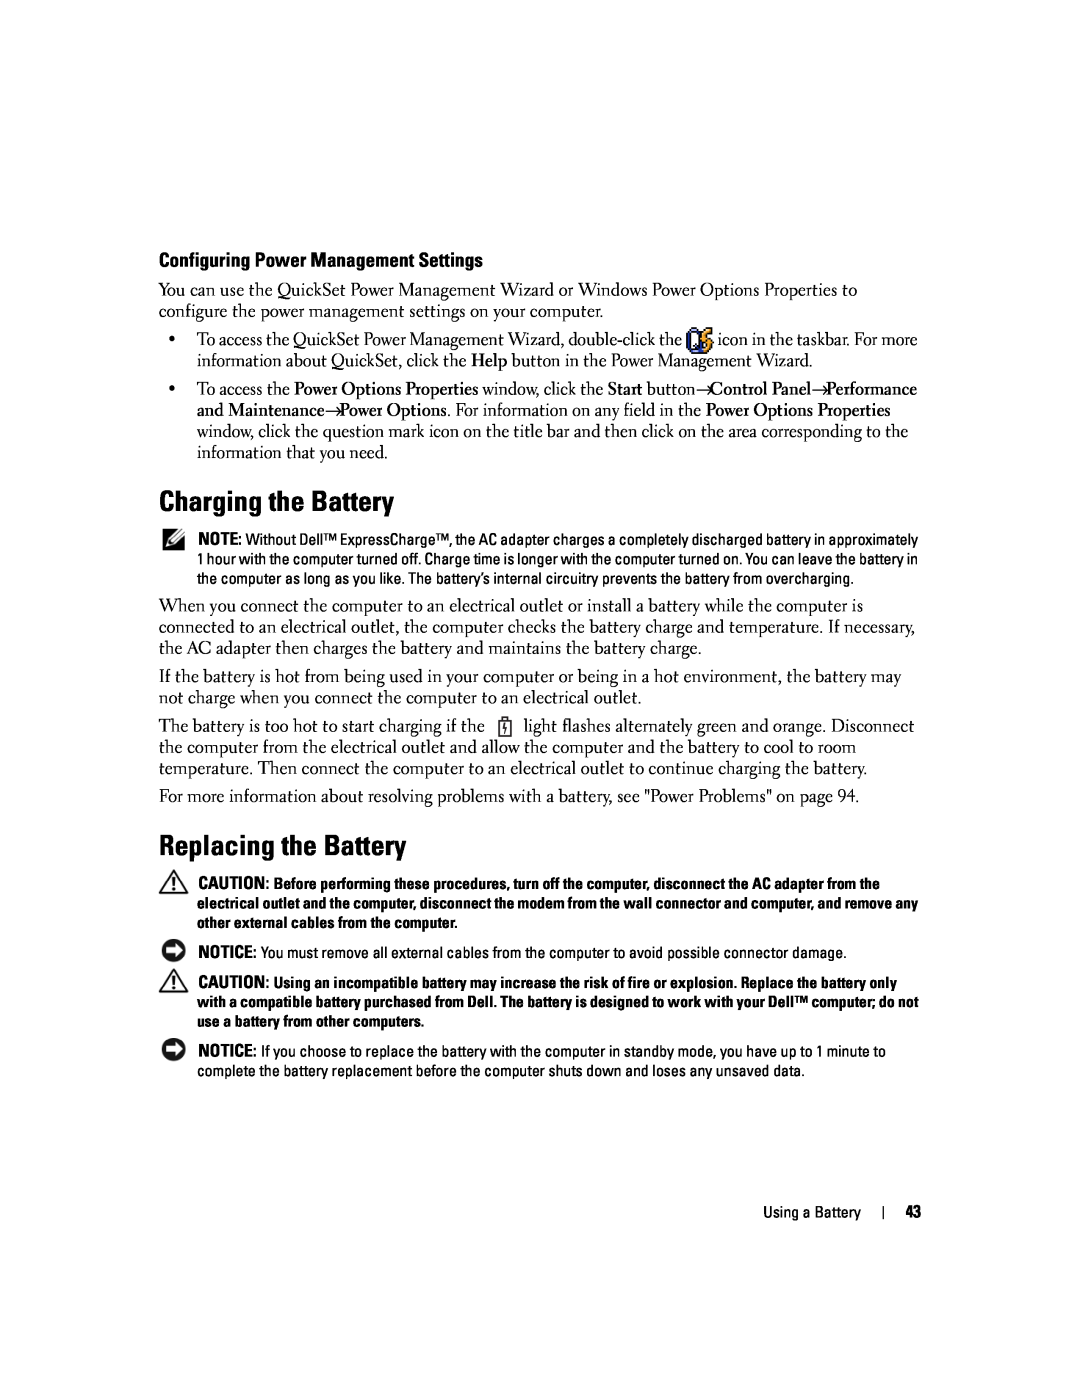 Dell PP20L owner manual Charging the Battery, Replacing the Battery, Configuring Power Management Settings 